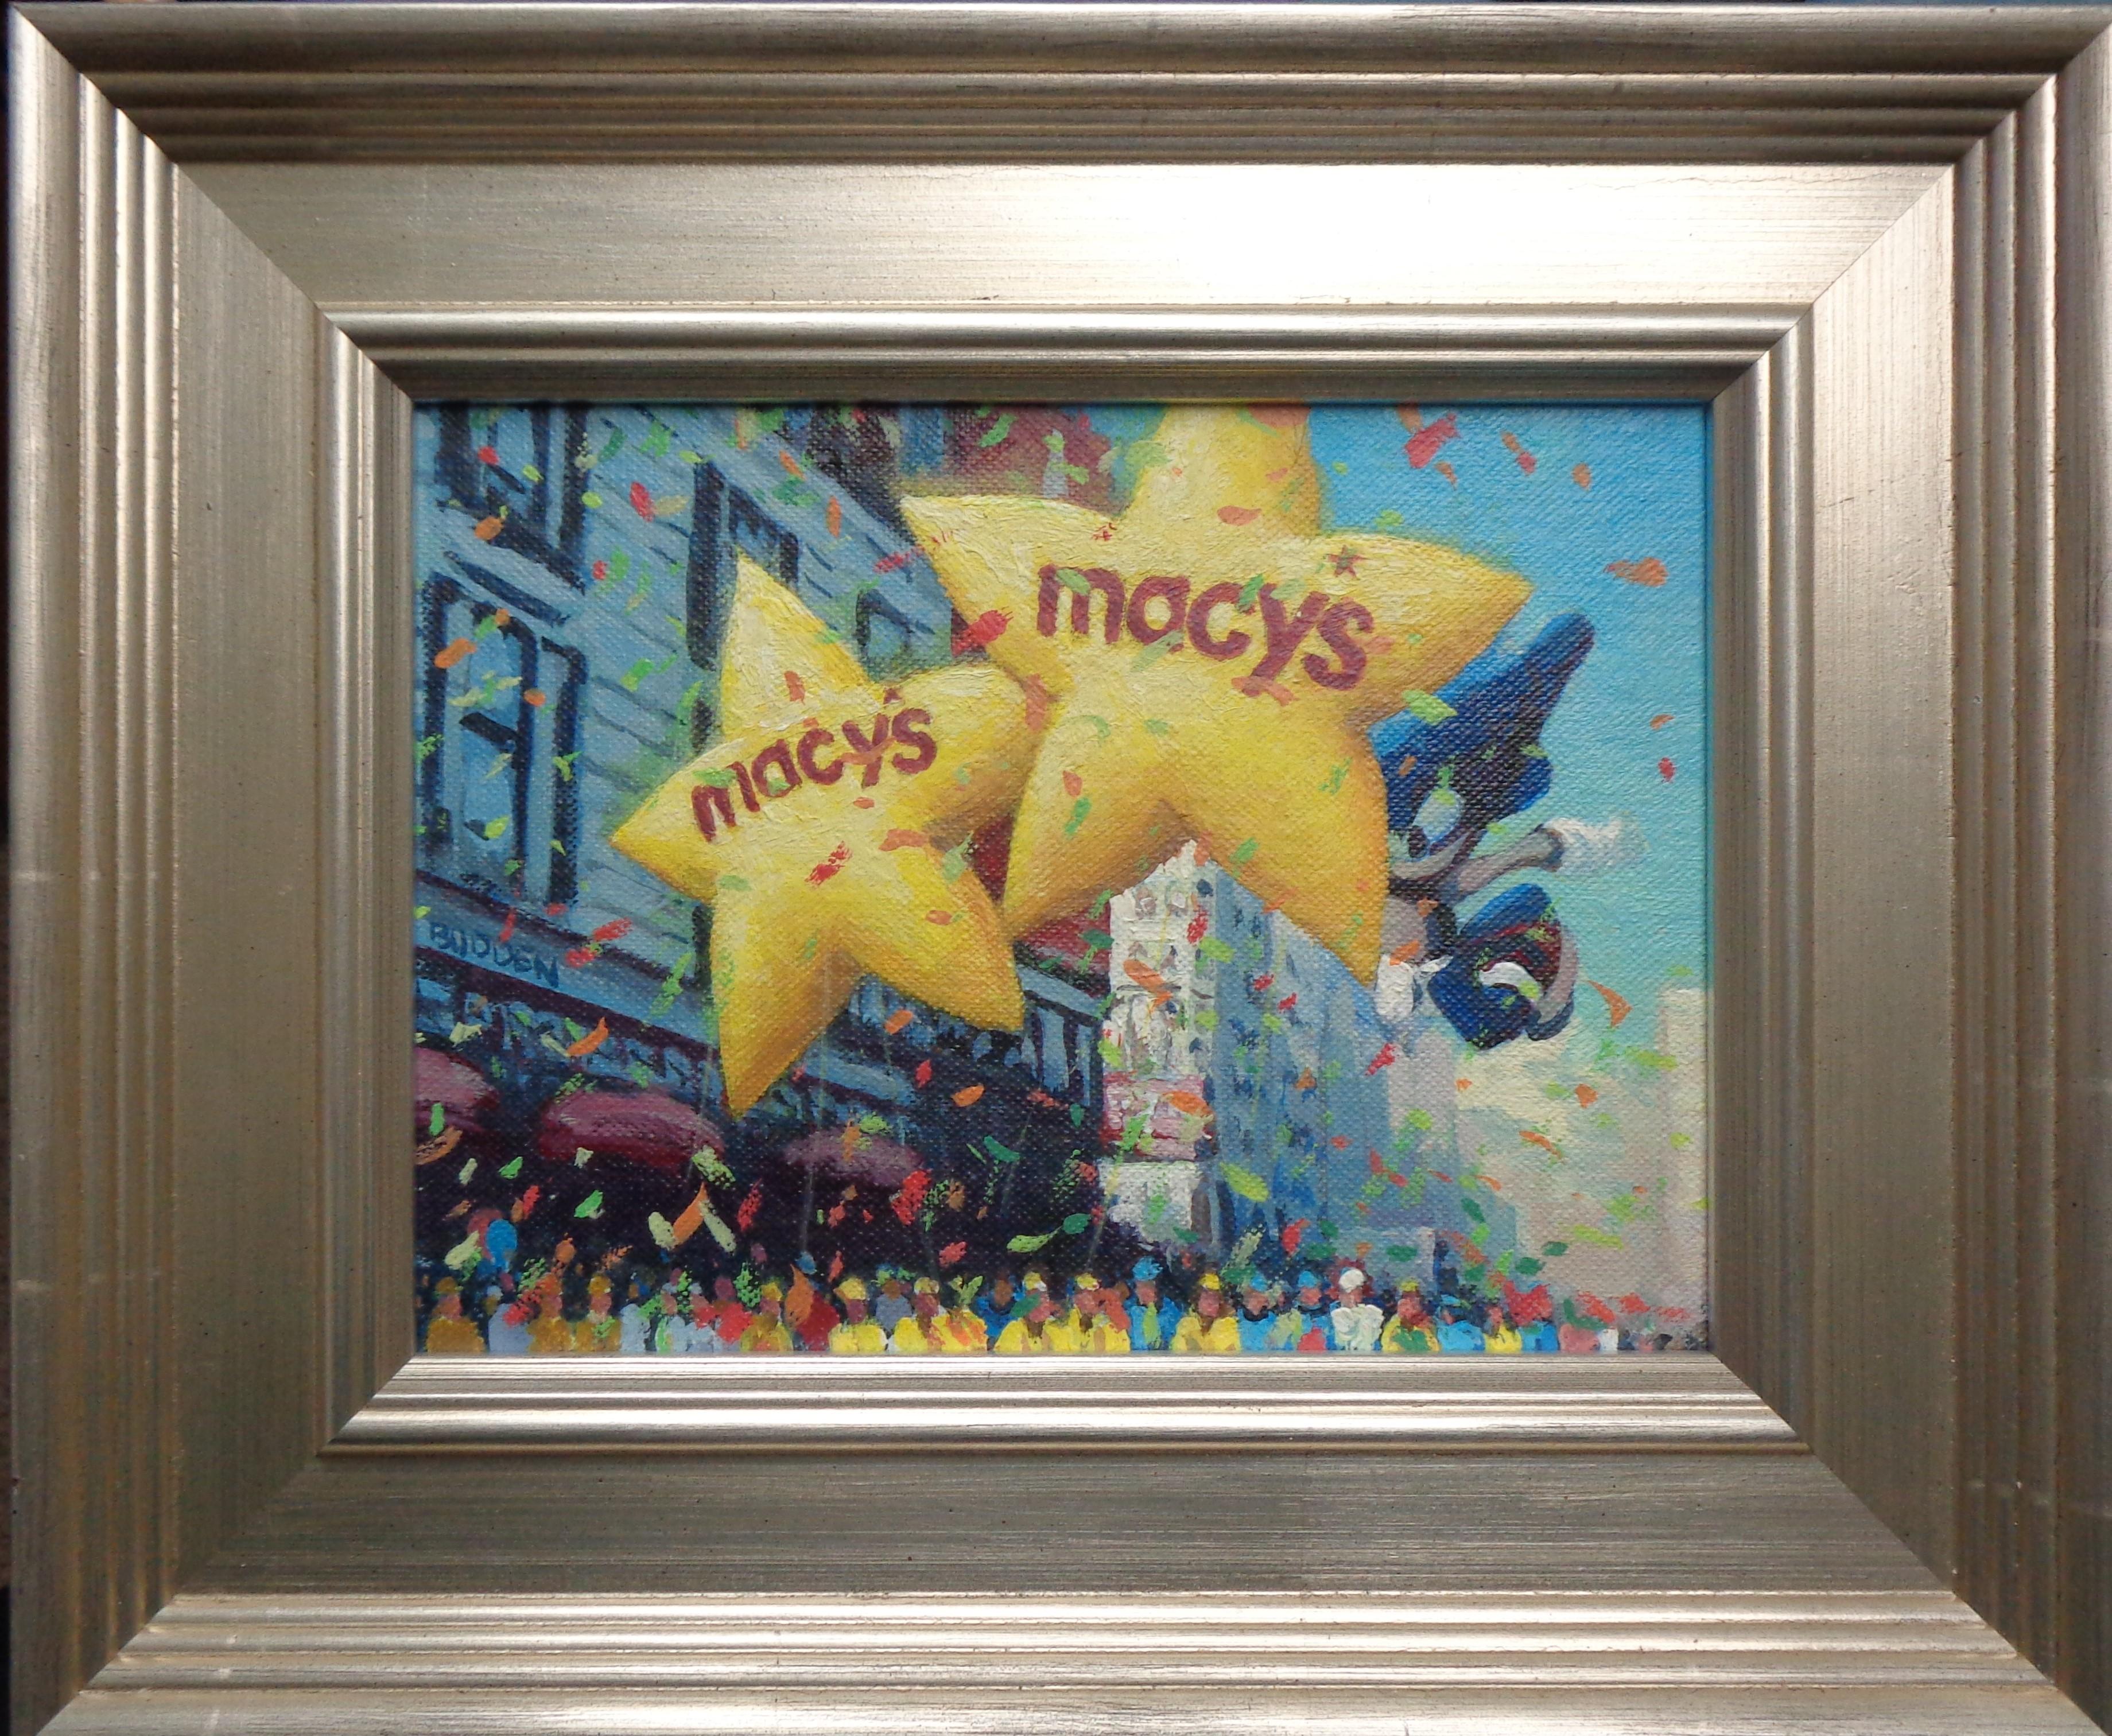 Macy's Sonic & Stars Study
Part of a series of 11 paintings.
An oil painting on canvas panel by award winning contemporary artist Michael Budden that showcases images from the Macy's Thanksgiving Parade, NYC. The image measures 6 x 8 unframed and